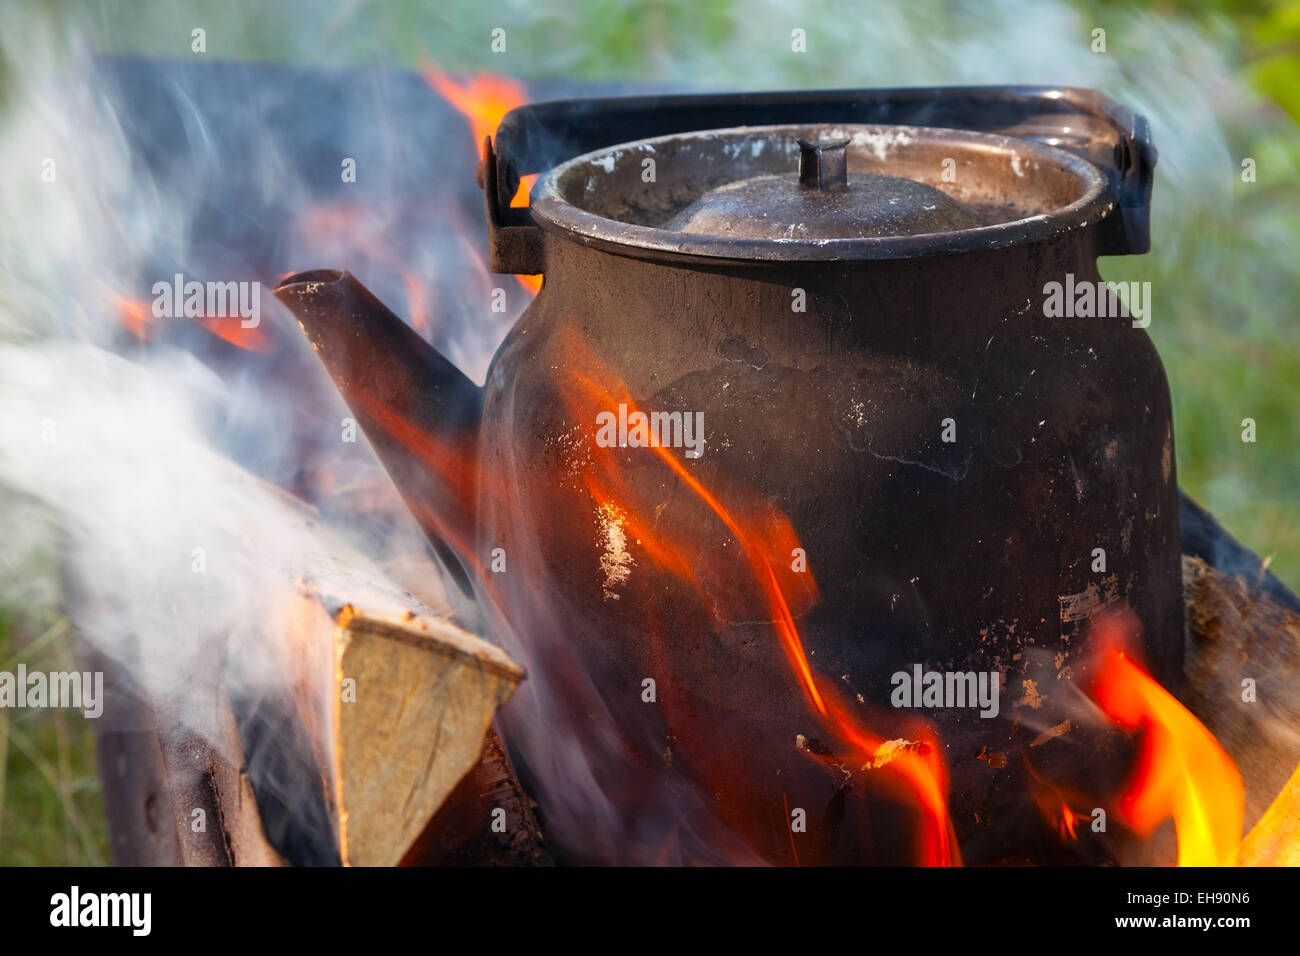 Bonfire with metal old black boiling teapot on it Stock Photo